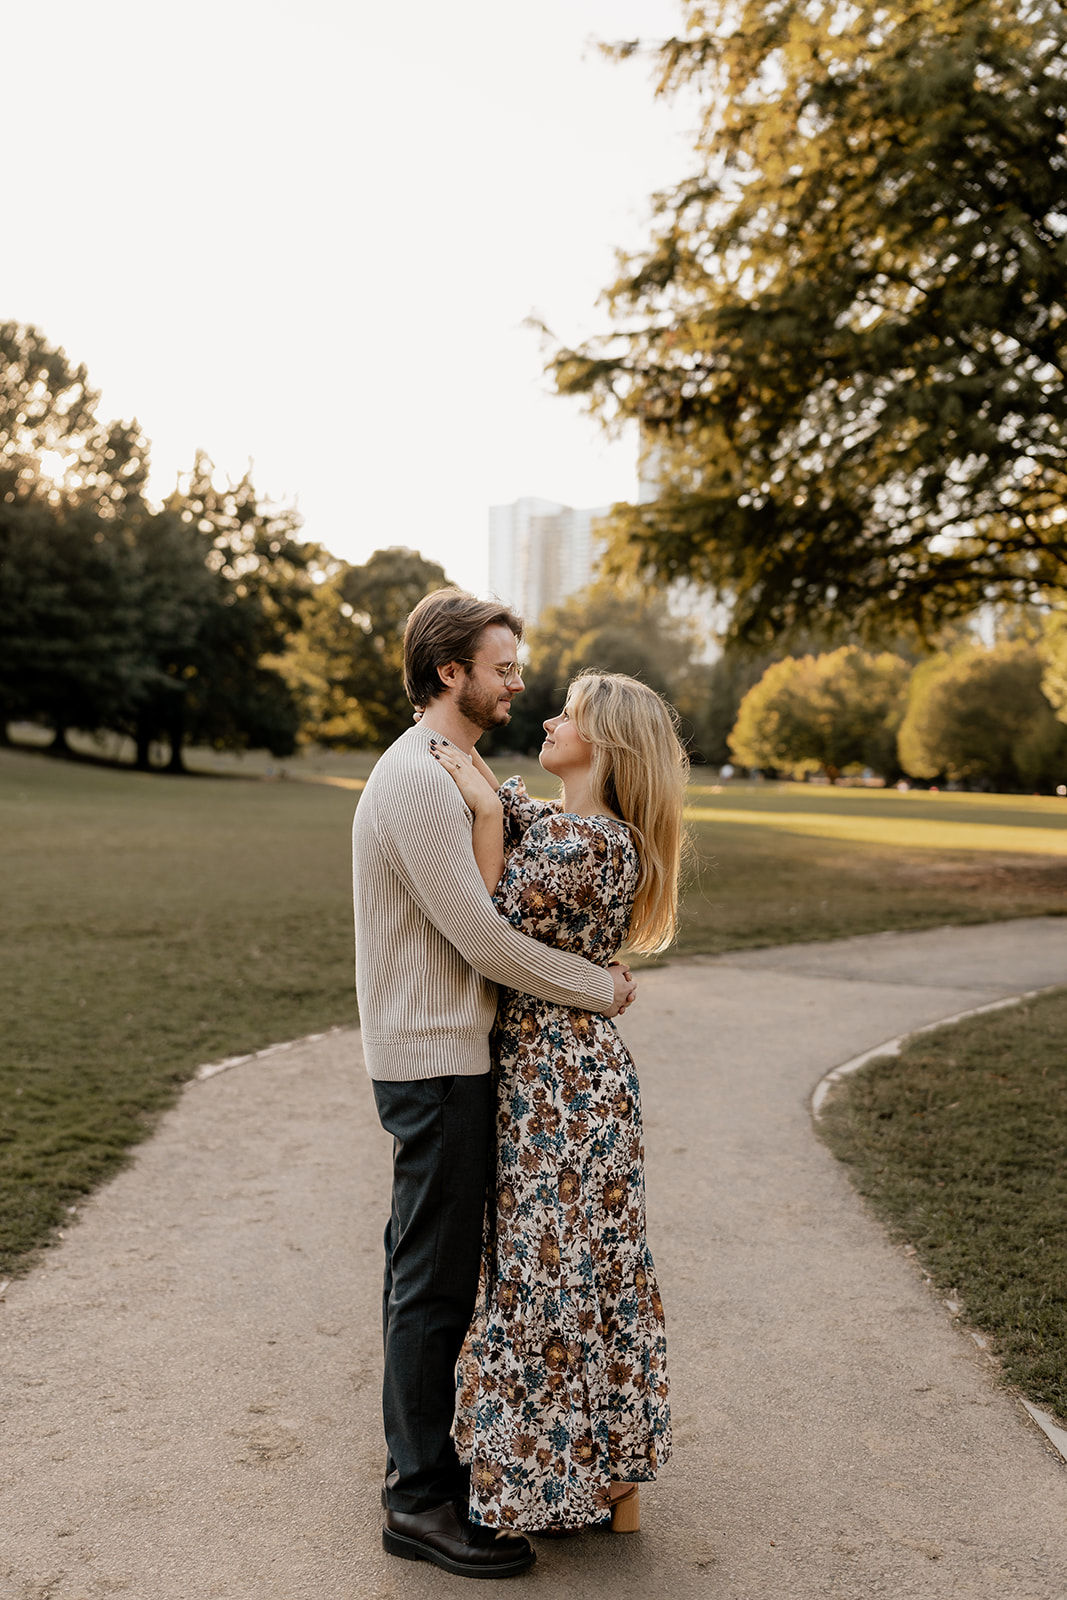 The couple's elegant attire complements the lush greenery of the park.
